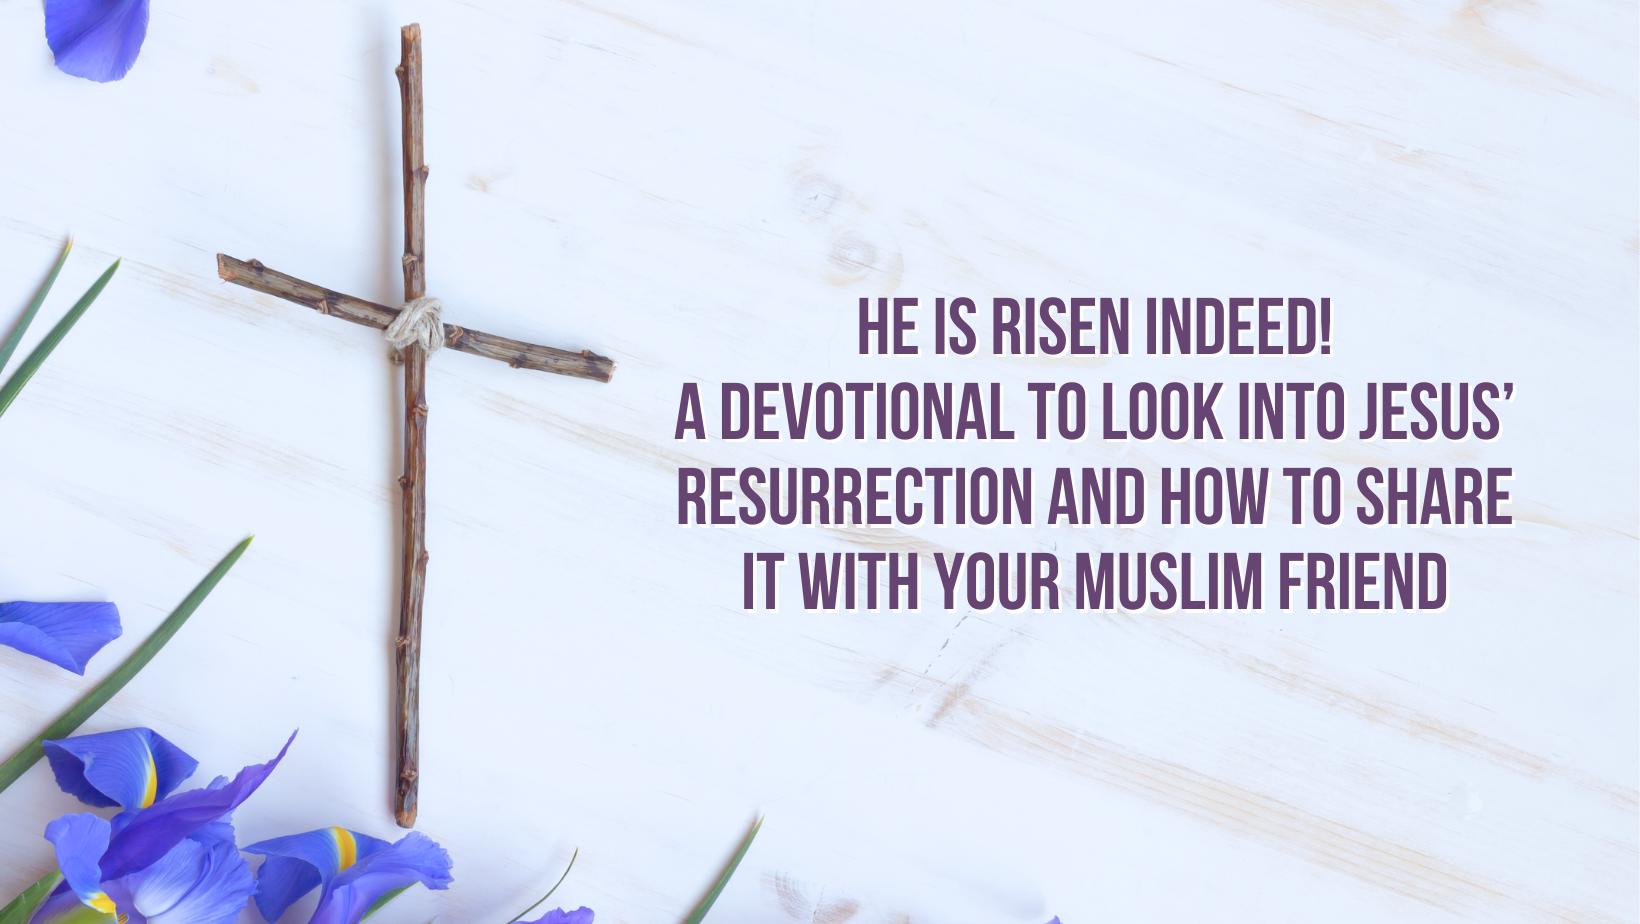 He is Risen Indeed! A devotional to look into Jesus’ resurrection and how to share it with your Muslim friend